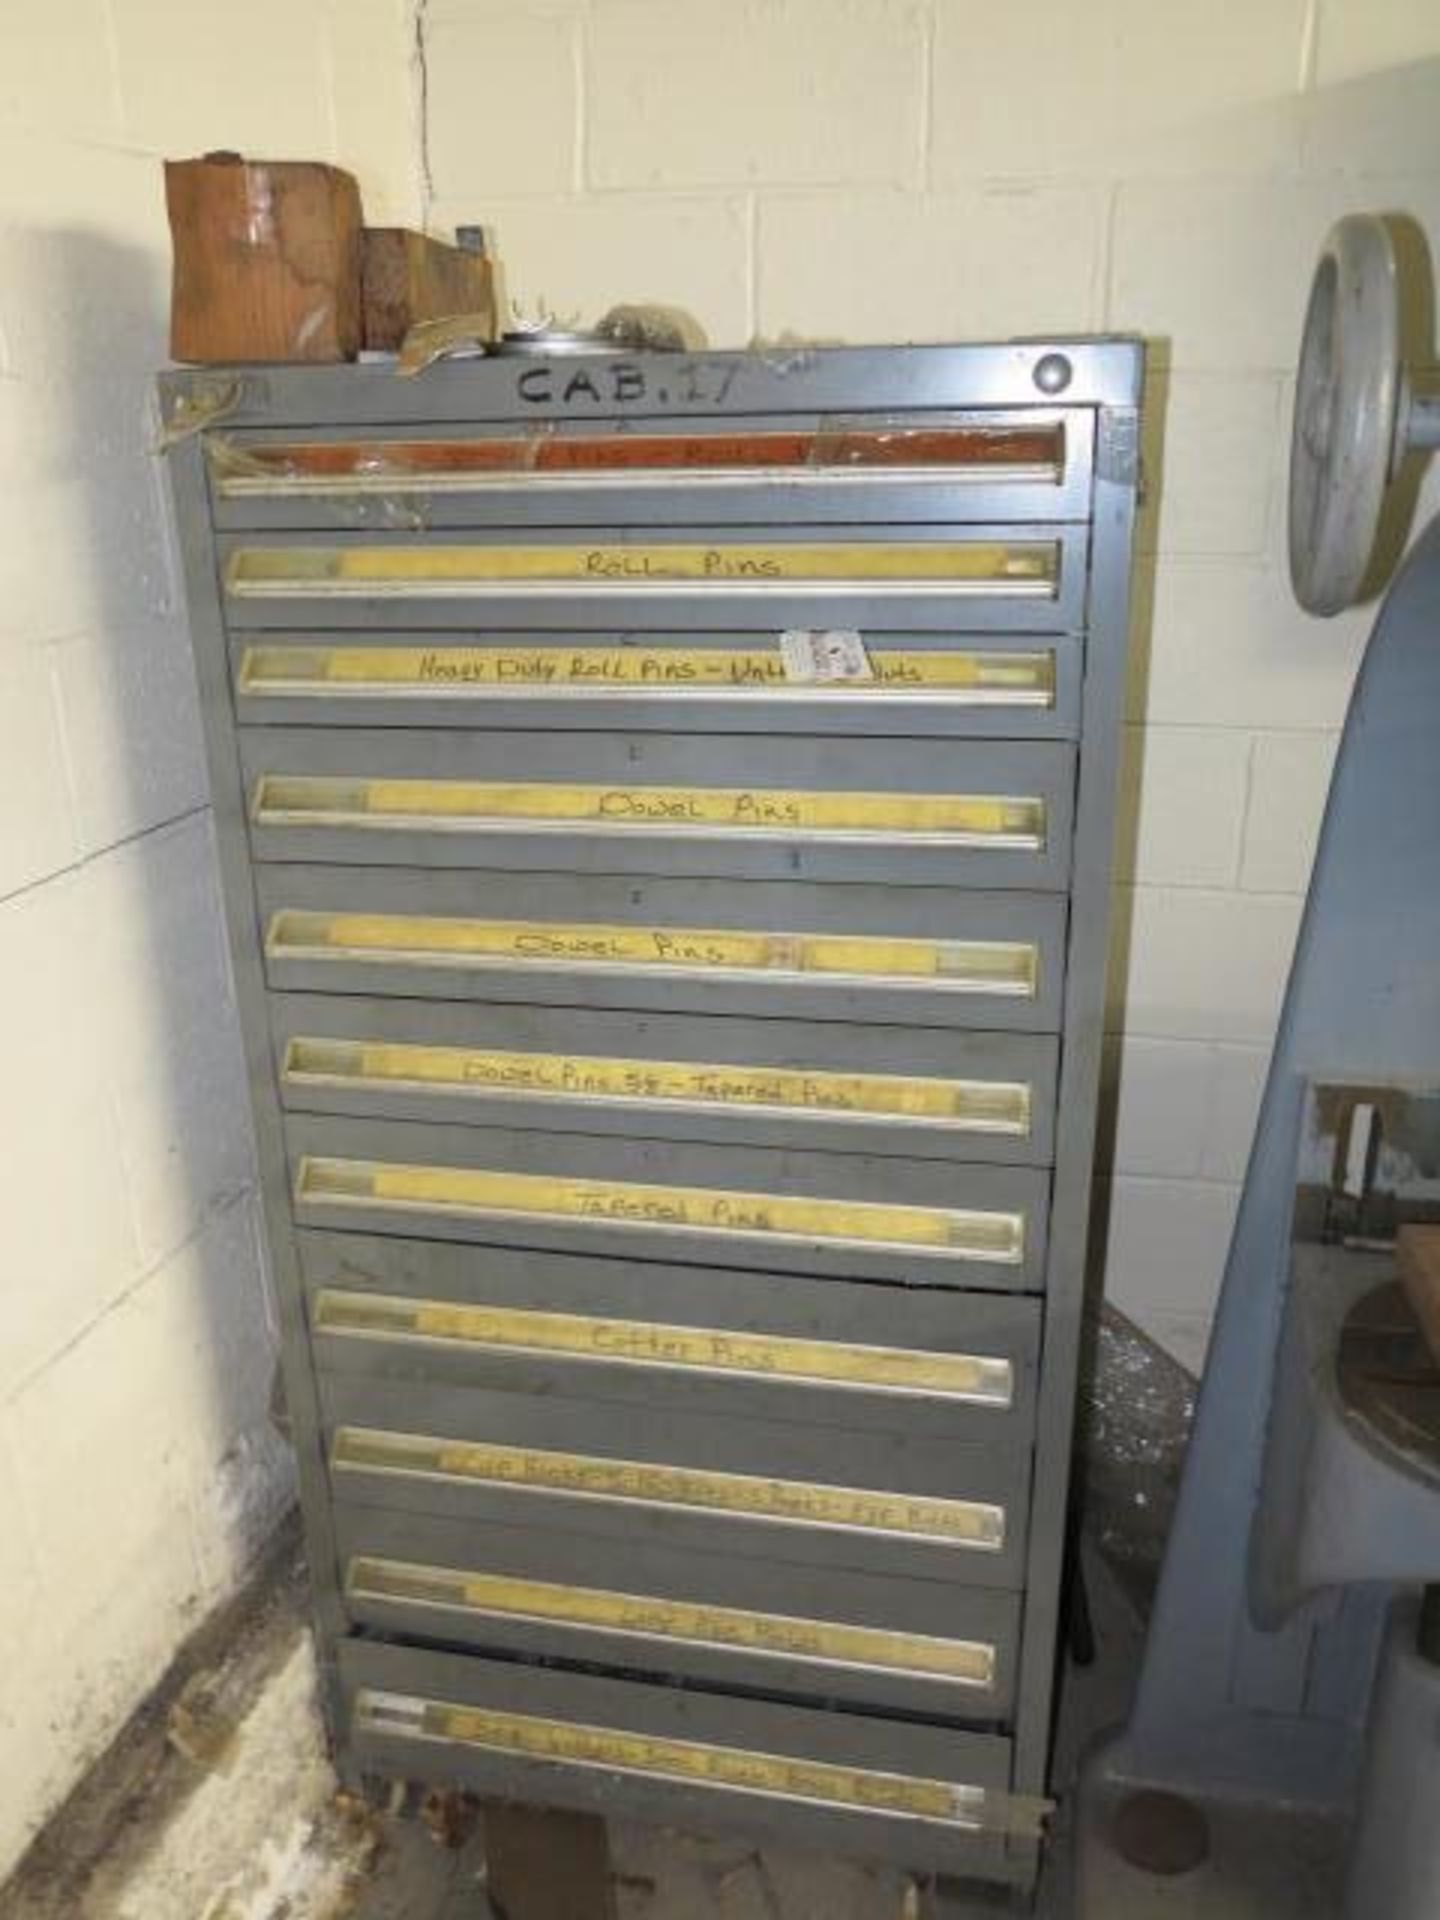 Stanley Vidmar Cabinet with Dowel Pins, Roll Pins, Tapered Pins, Cotter Pins, Full